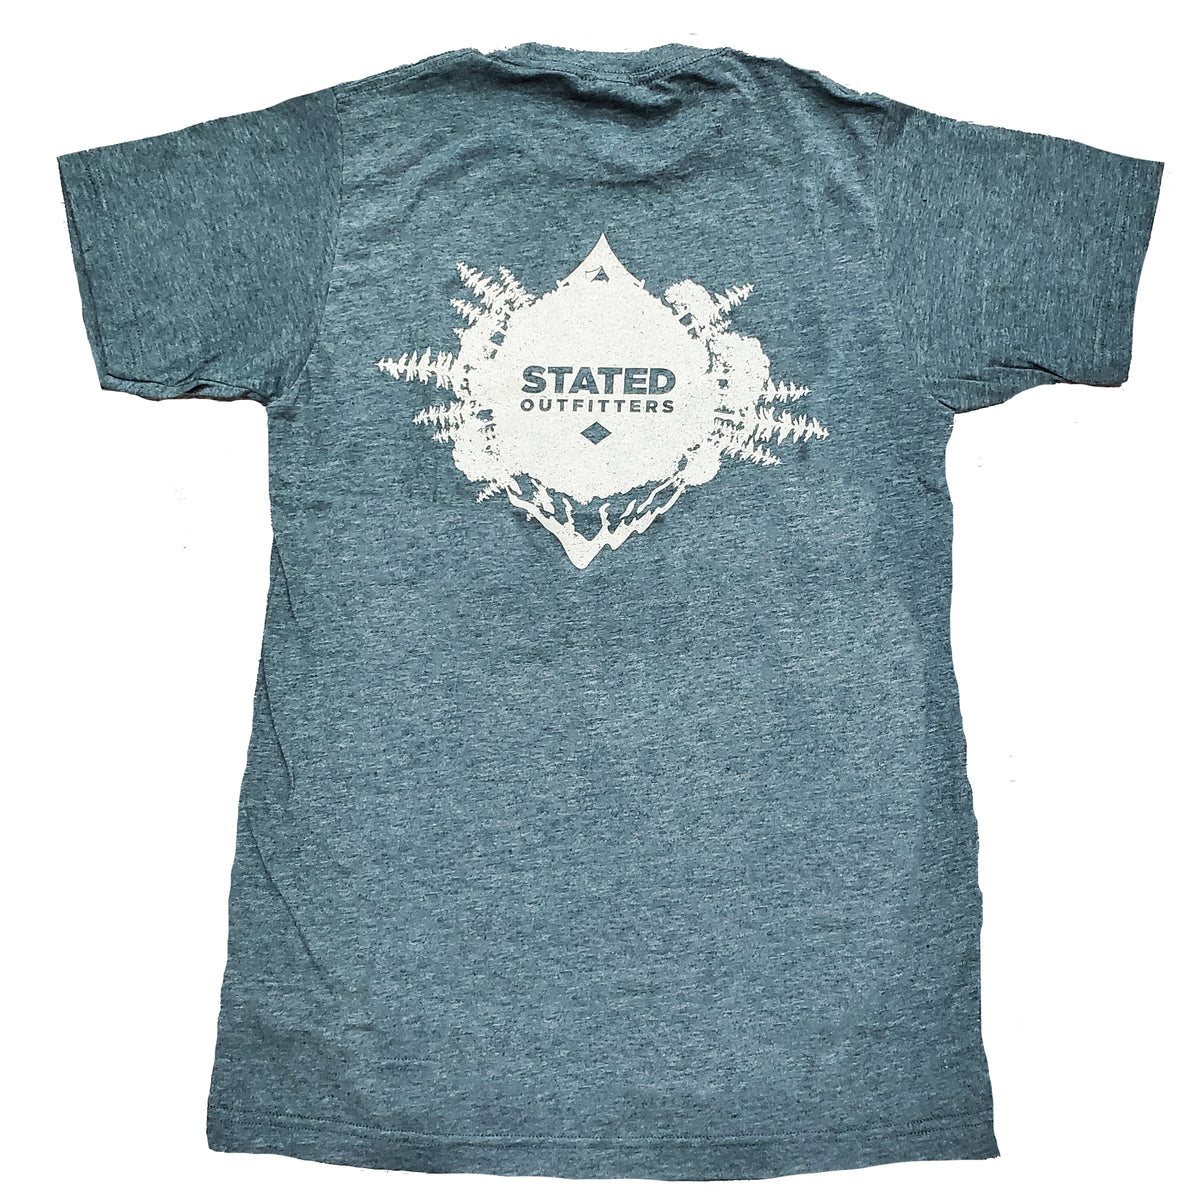 Stated Outfitters Camp the World Tee